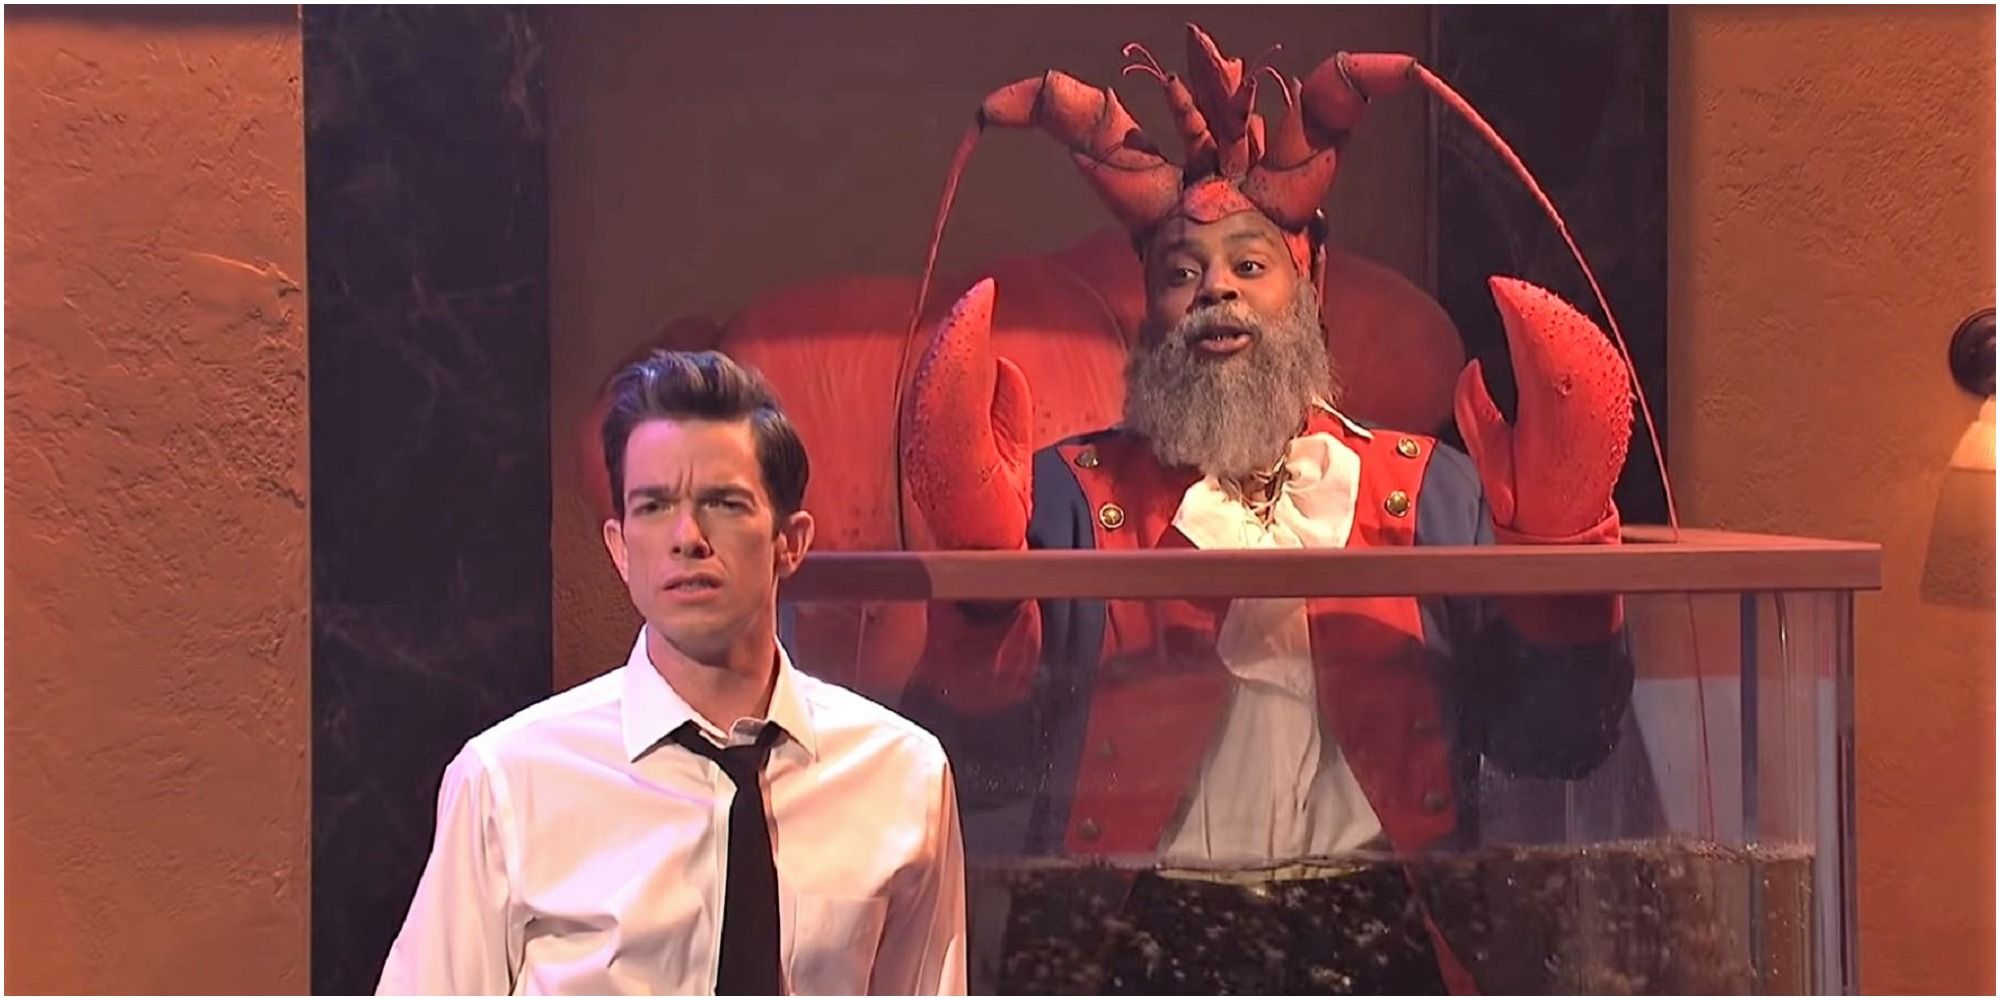 A screenshot of John Mulaney and Kenan Thompson in the &quot;Diner Lobster&quot; sketch from SNL